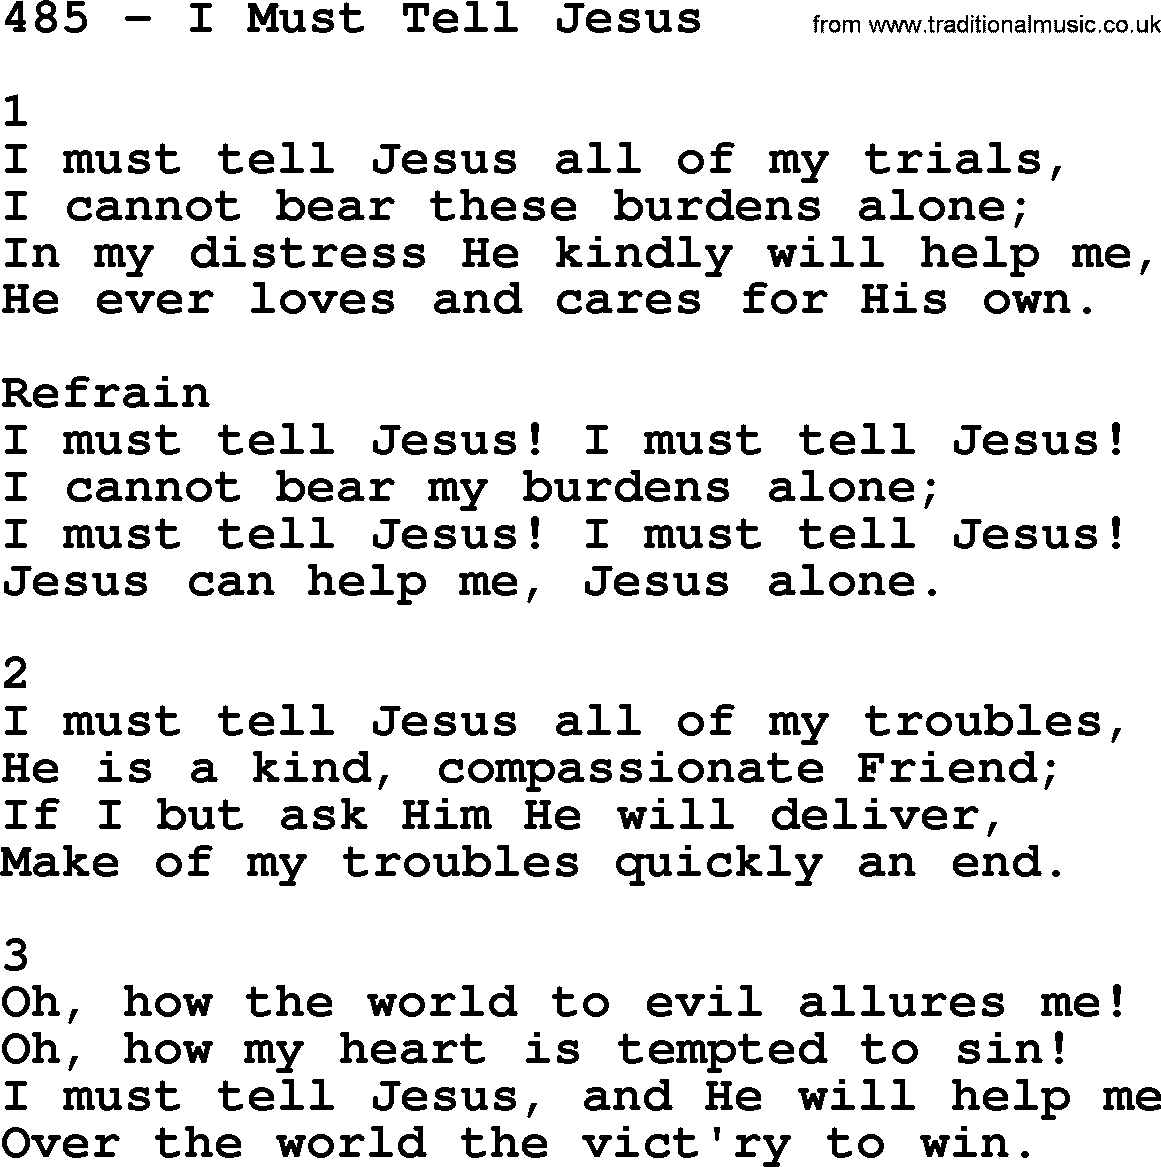 Complete Adventis Hymnal, title: 485-I Must Tell Jesus, with lyrics, midi, mp3, powerpoints(PPT) and PDF,